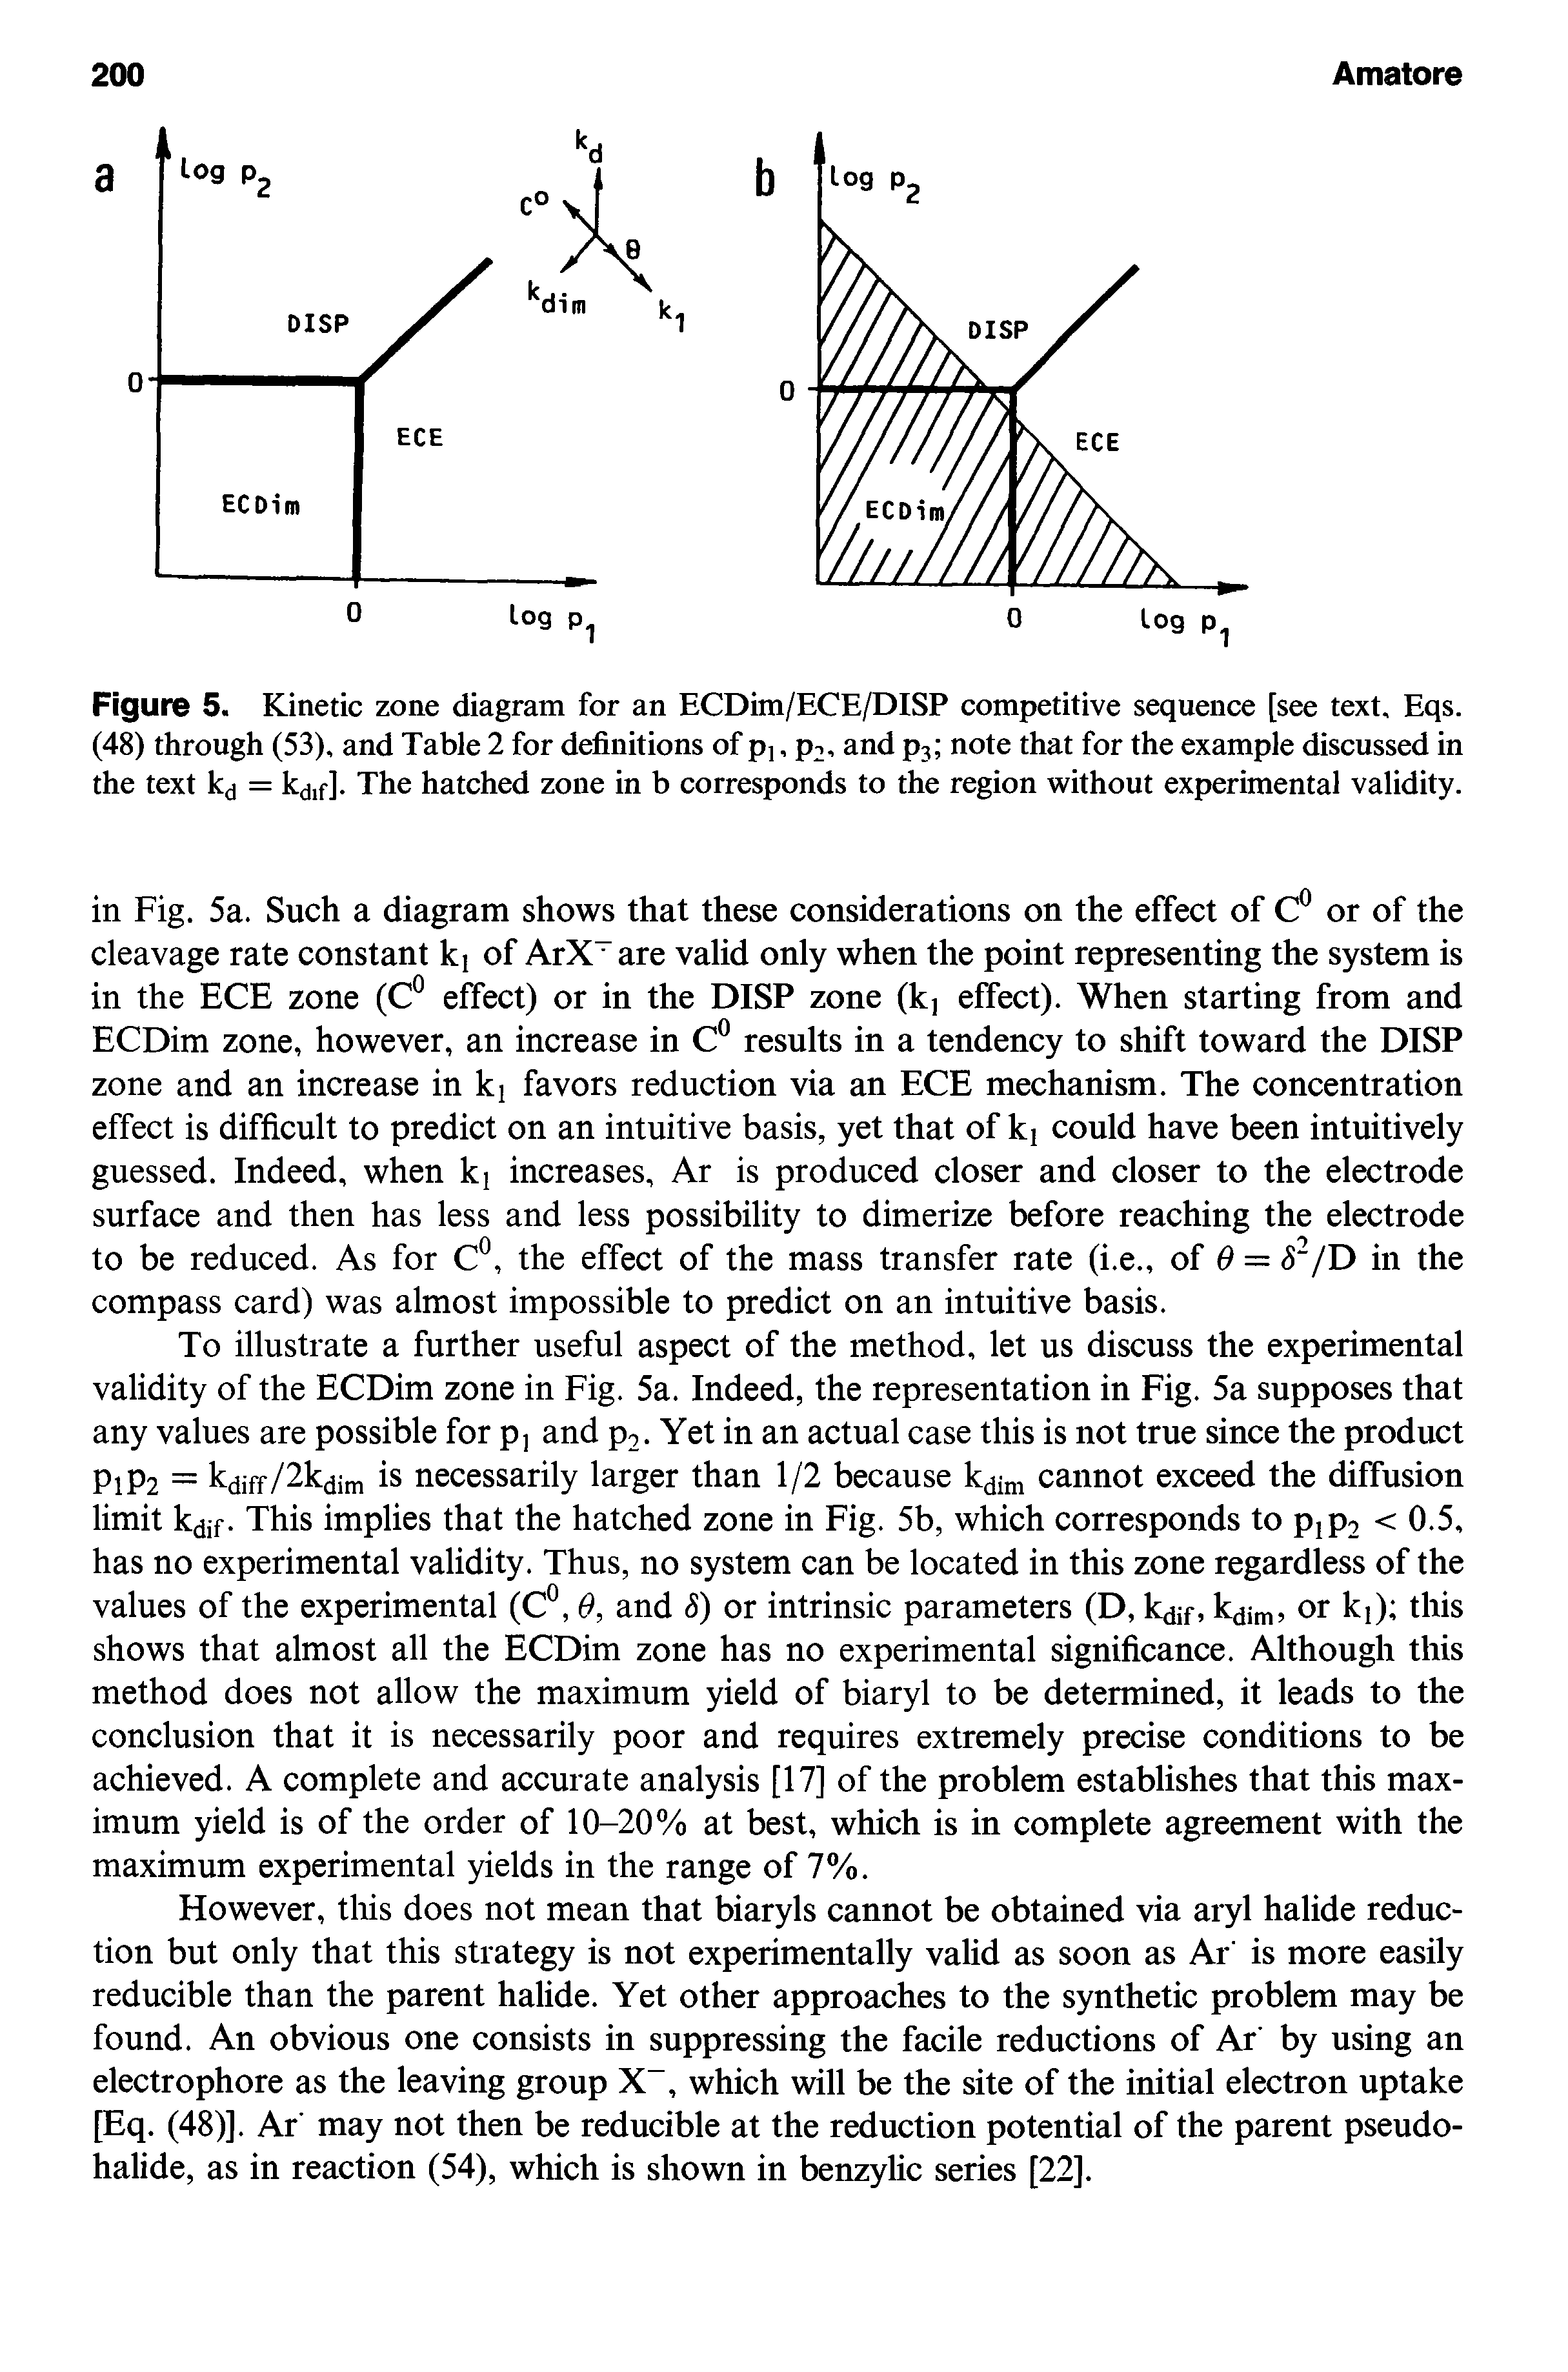 Figure 5. Kinetic zone diagram for an ECDim/ECE/DISP competitive sequence [see text, Eqs. (48) through (53), and Table 2 for definitions of p], P2, and P3 note that for the example discussed in the text kj = kdif]. The hatched zone in b corresponds to the region without experimental validity.